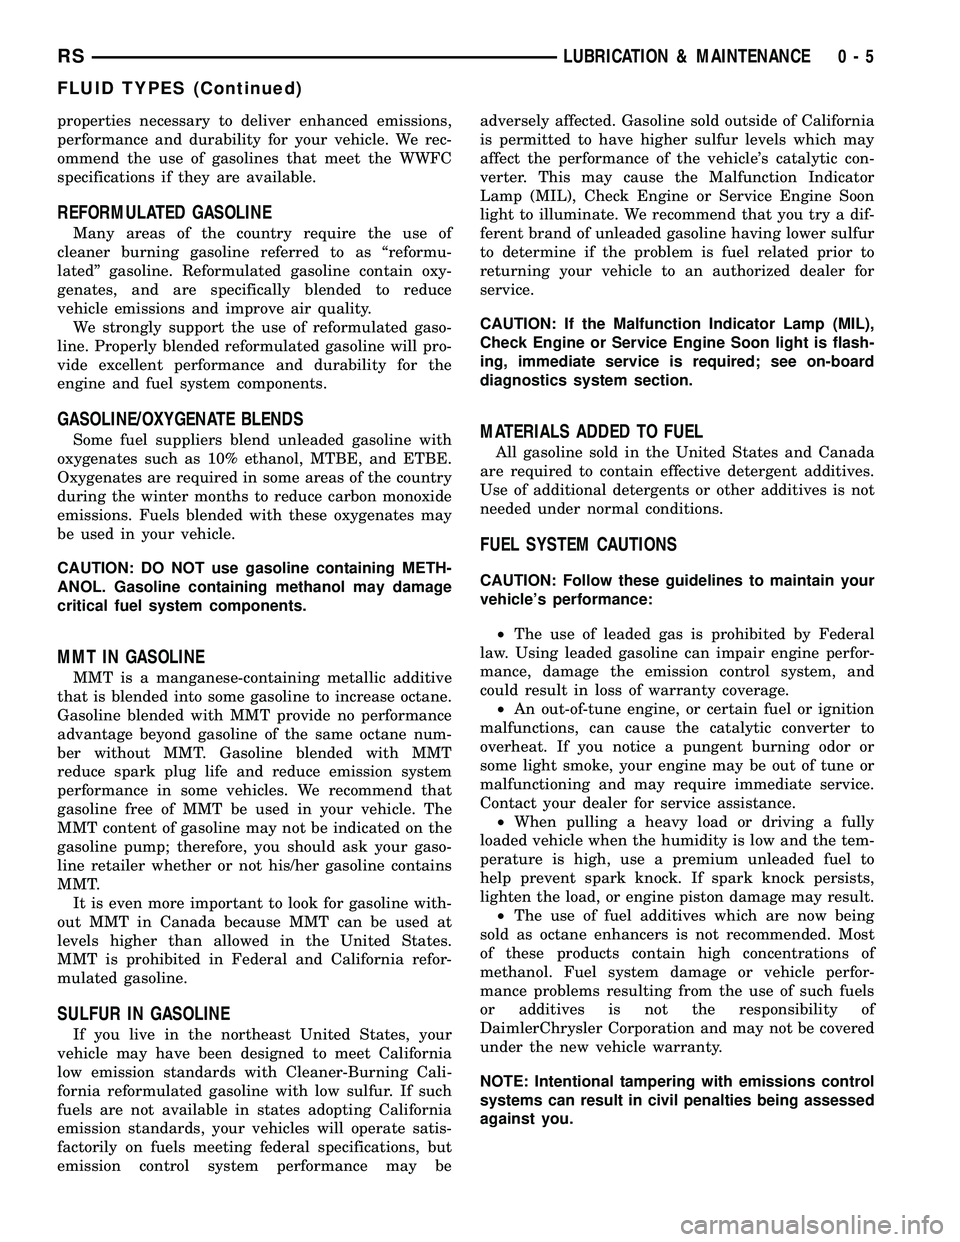 CHRYSLER VOYAGER 2005  Service Manual properties necessary to deliver enhanced emissions,
performance and durability for your vehicle. We rec-
ommend the use of gasolines that meet the WWFC
specifications if they are available.
REFORMULAT